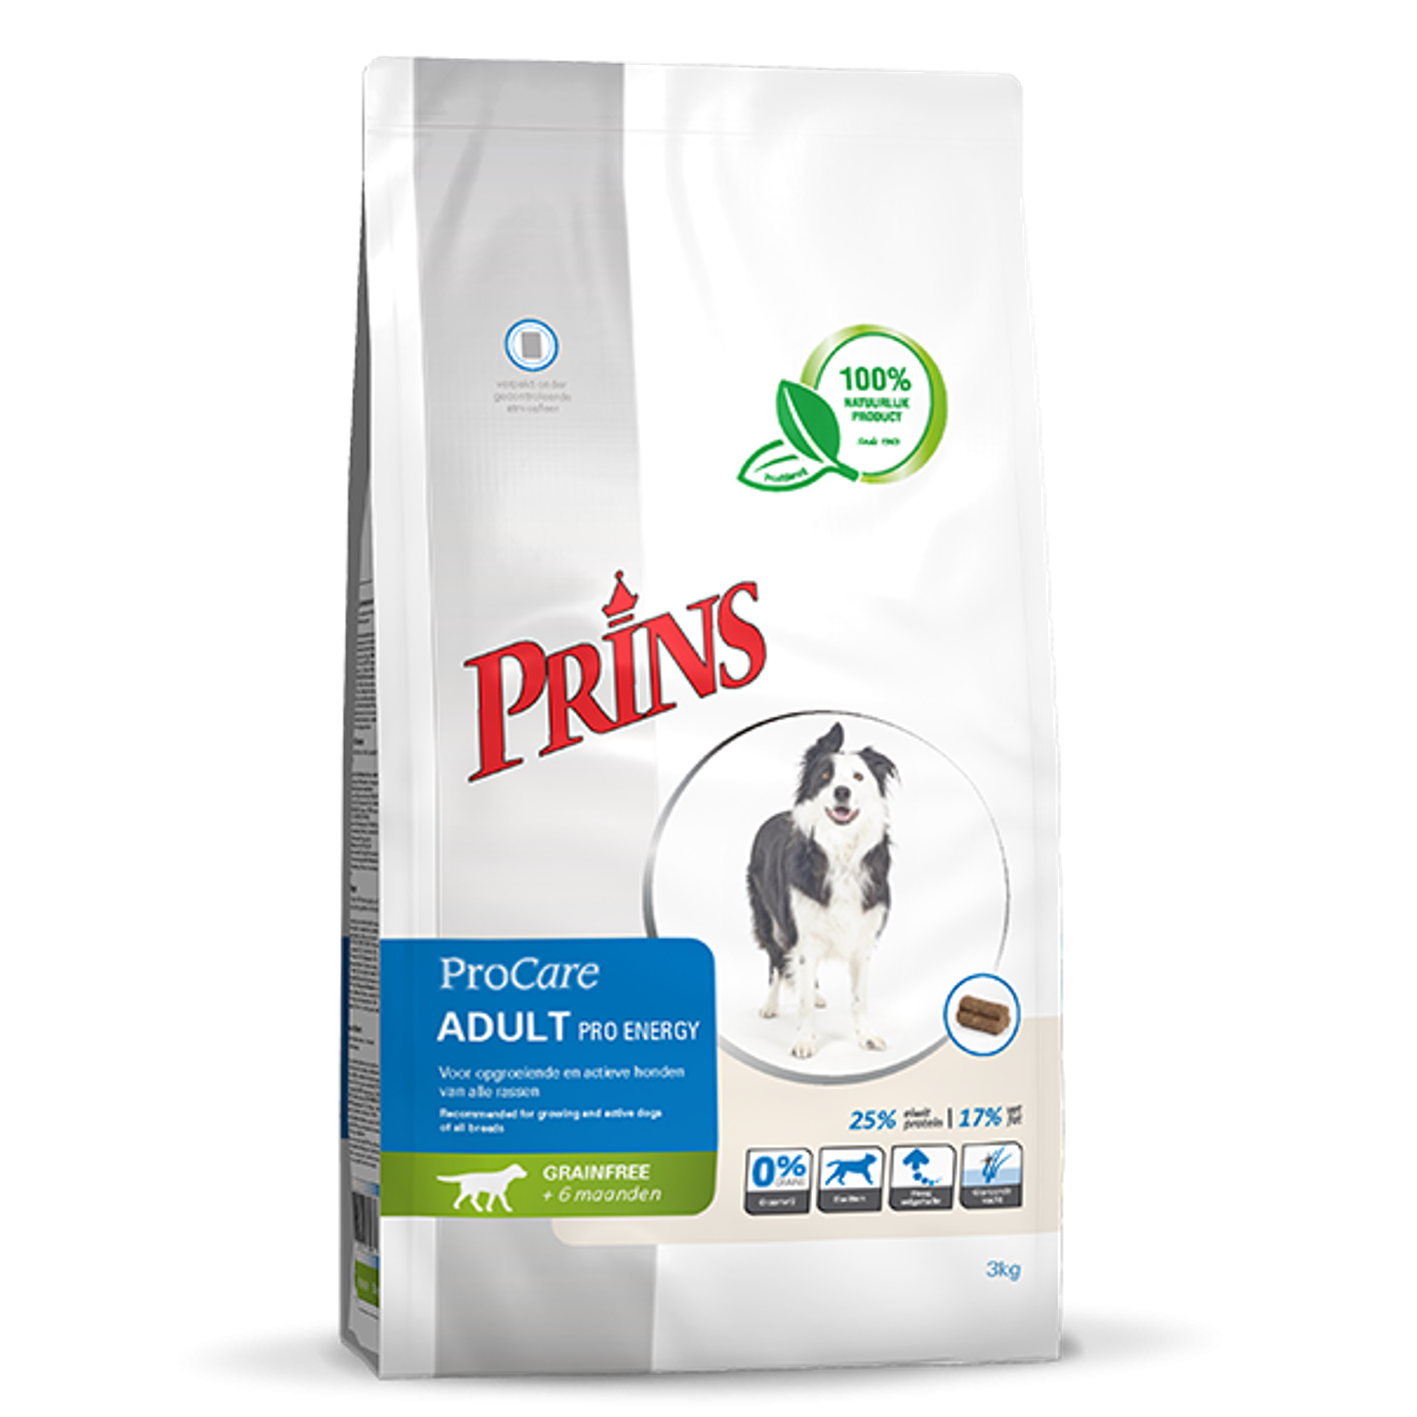 Prins PC Adult Pro Energy Dry Dog Food, Grainfree With Poultry, 3kg